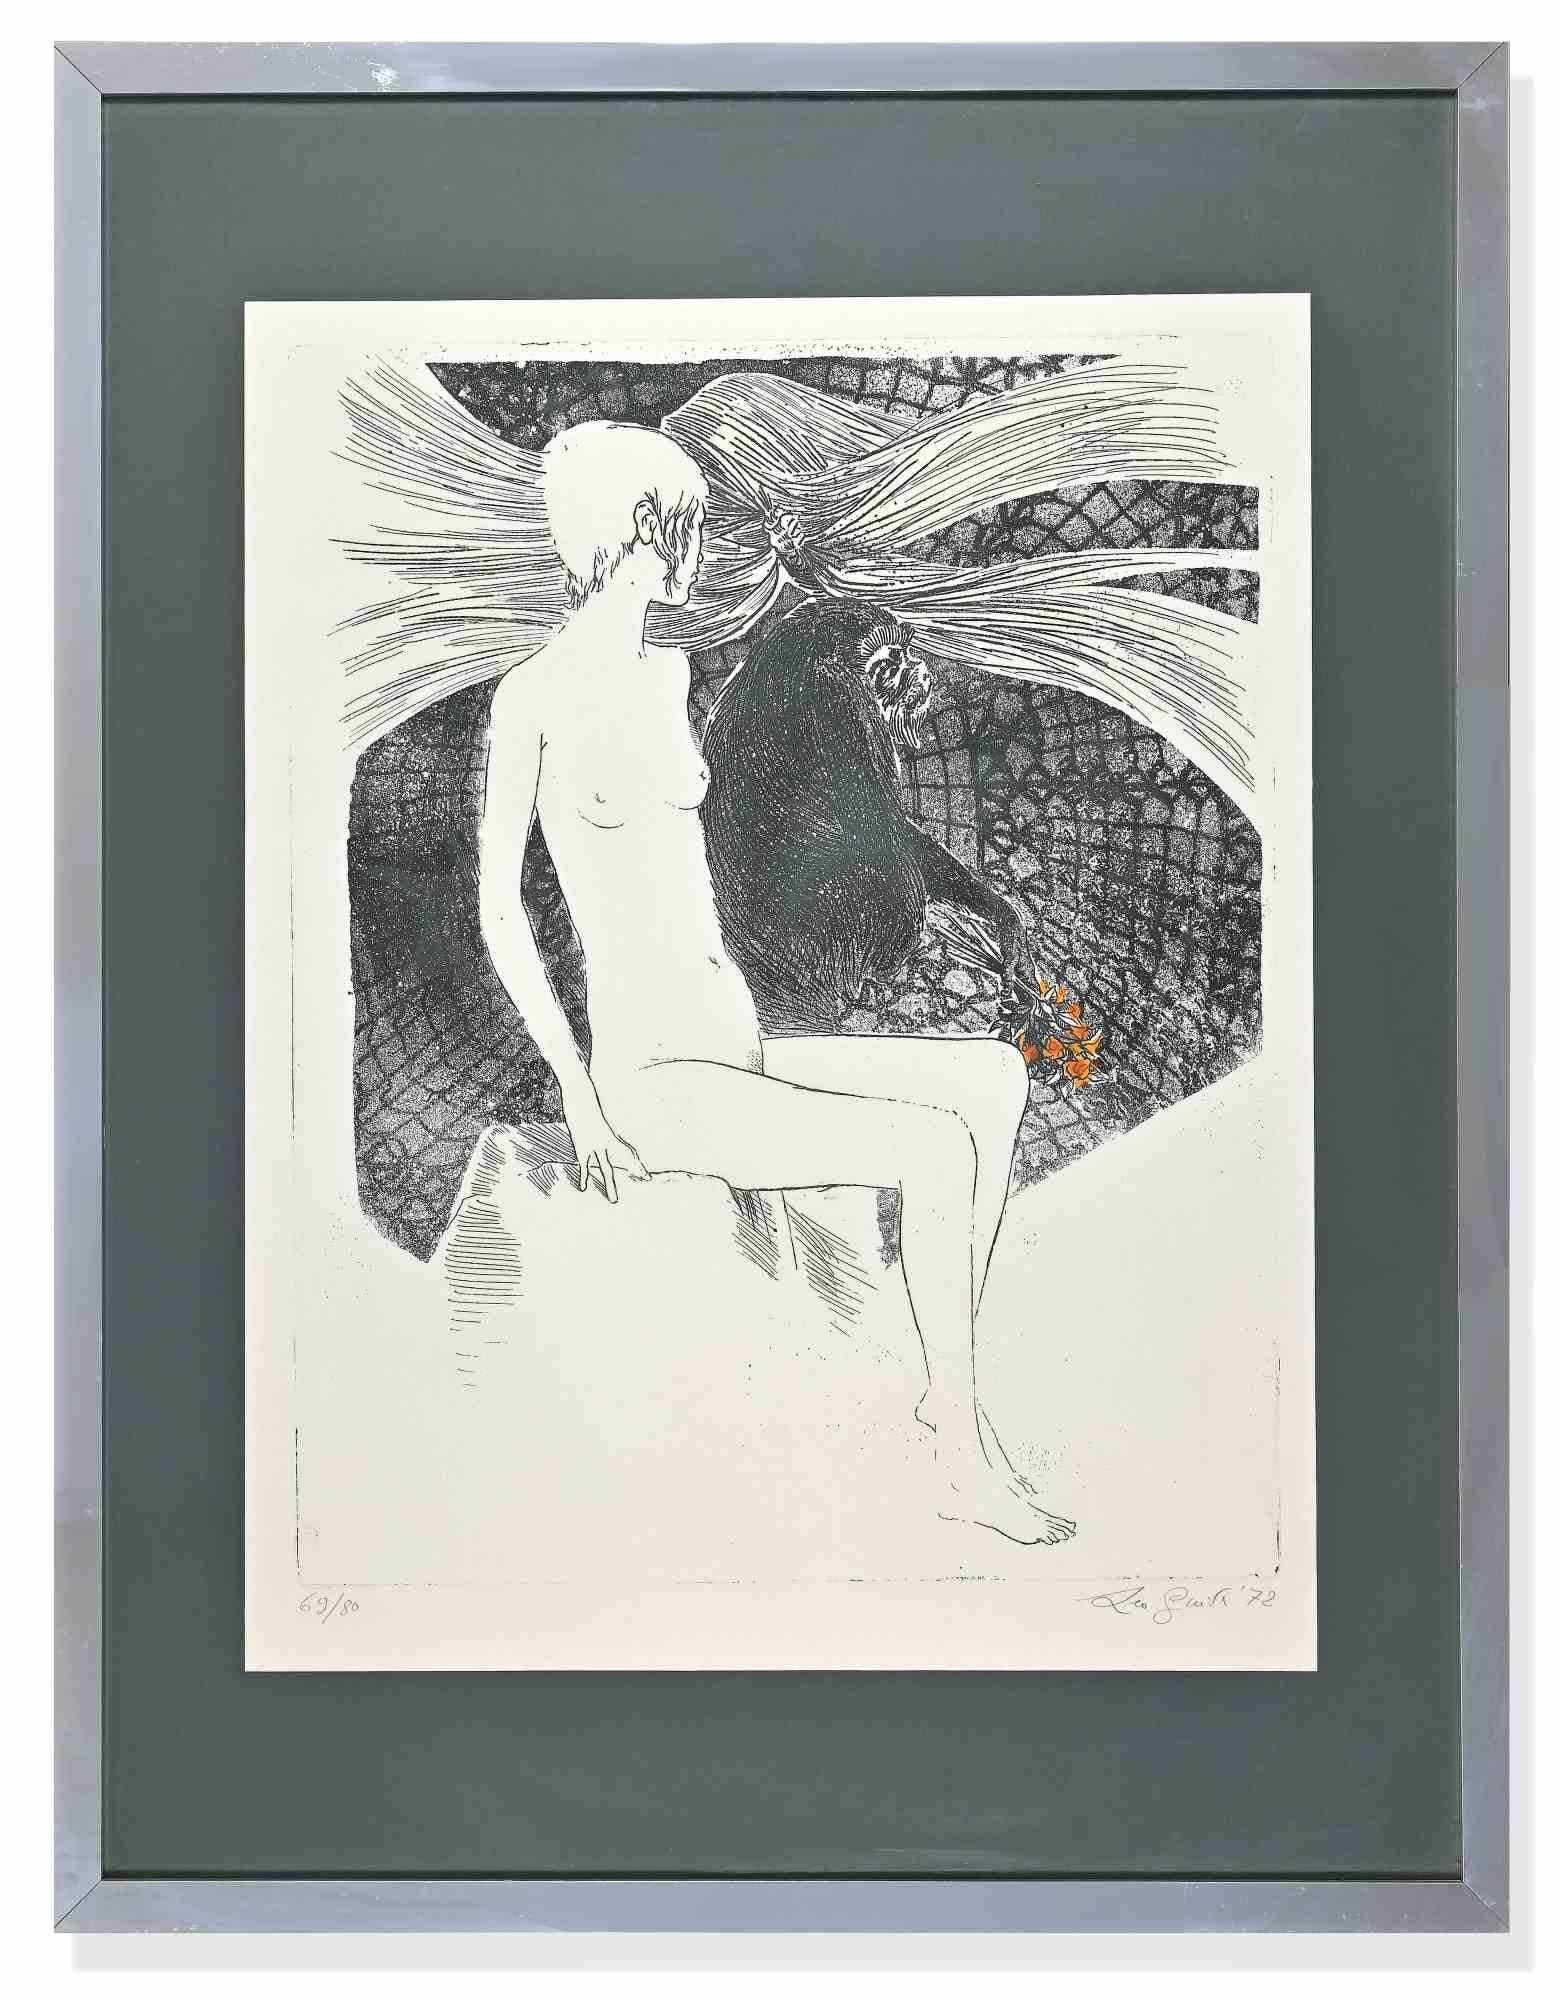 Woman is an original contemporary artwork realized by Leo Guida in 1972.

Black and white etching.

Hand signed and dated by the artist on the lower right margin.

Numbered on the lower left. Edition 69/80.

Includes frame: 75.5 x 2 x 58 cm

